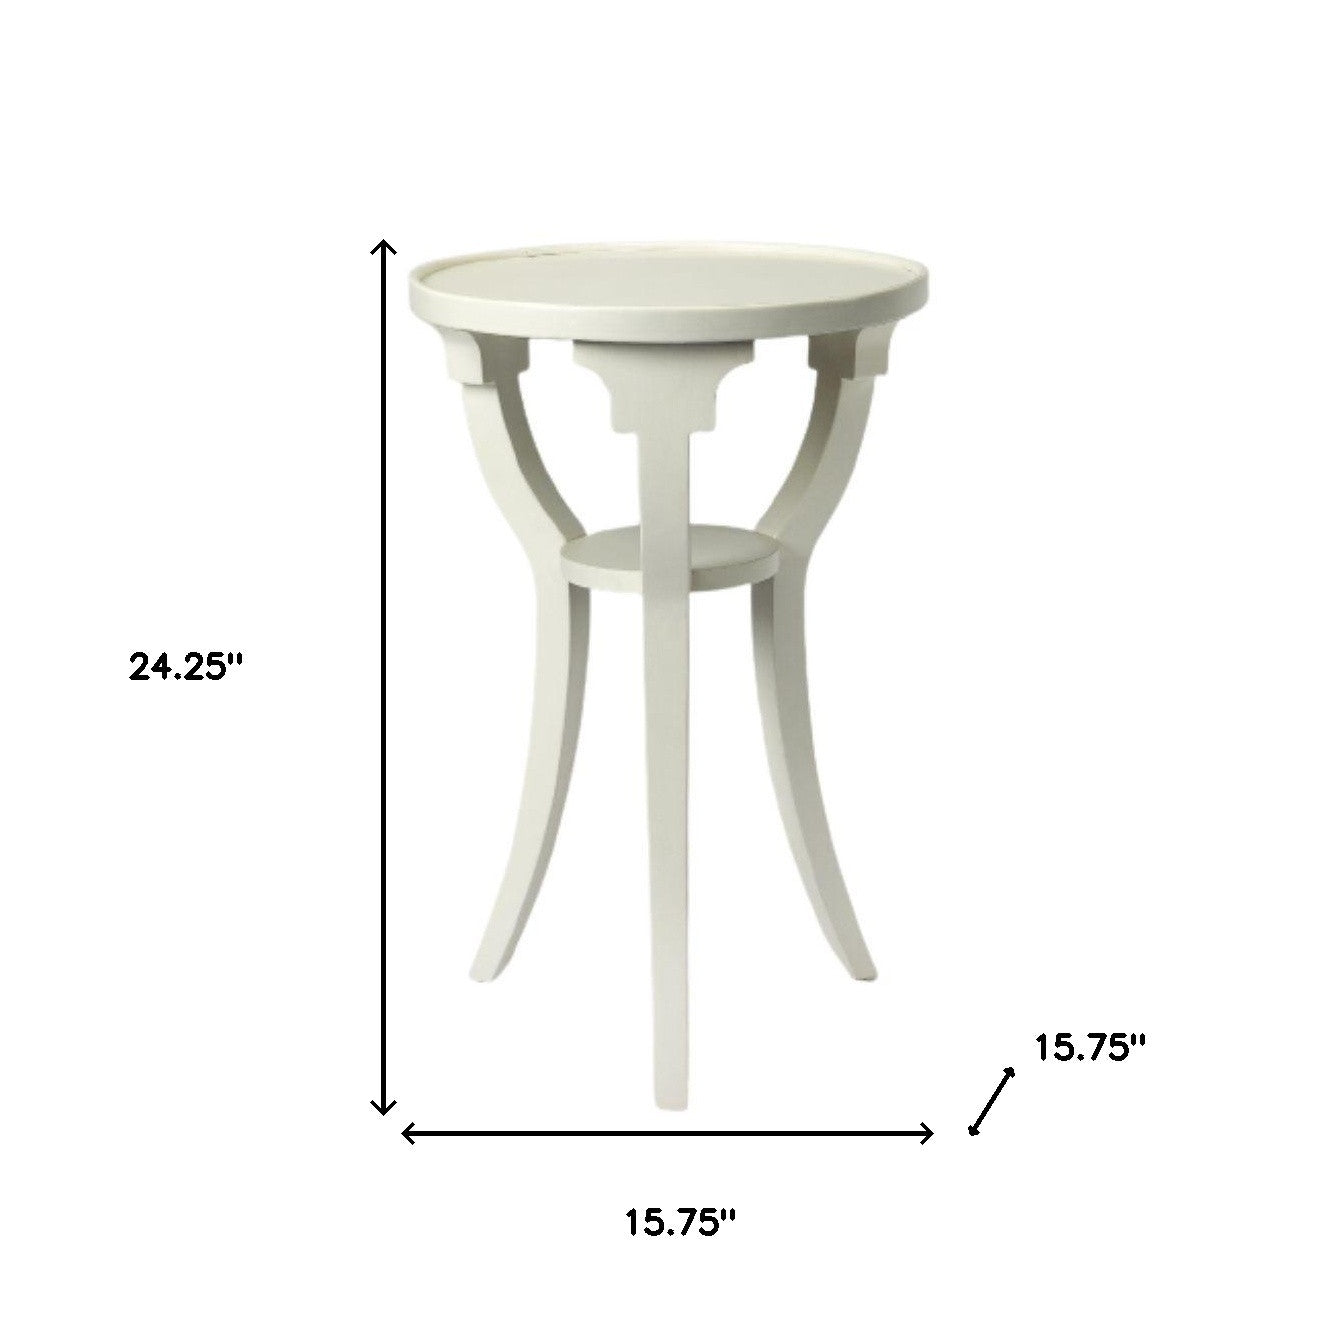 24" White And Cottage White Manufactured Wood Round End Table With Shelf